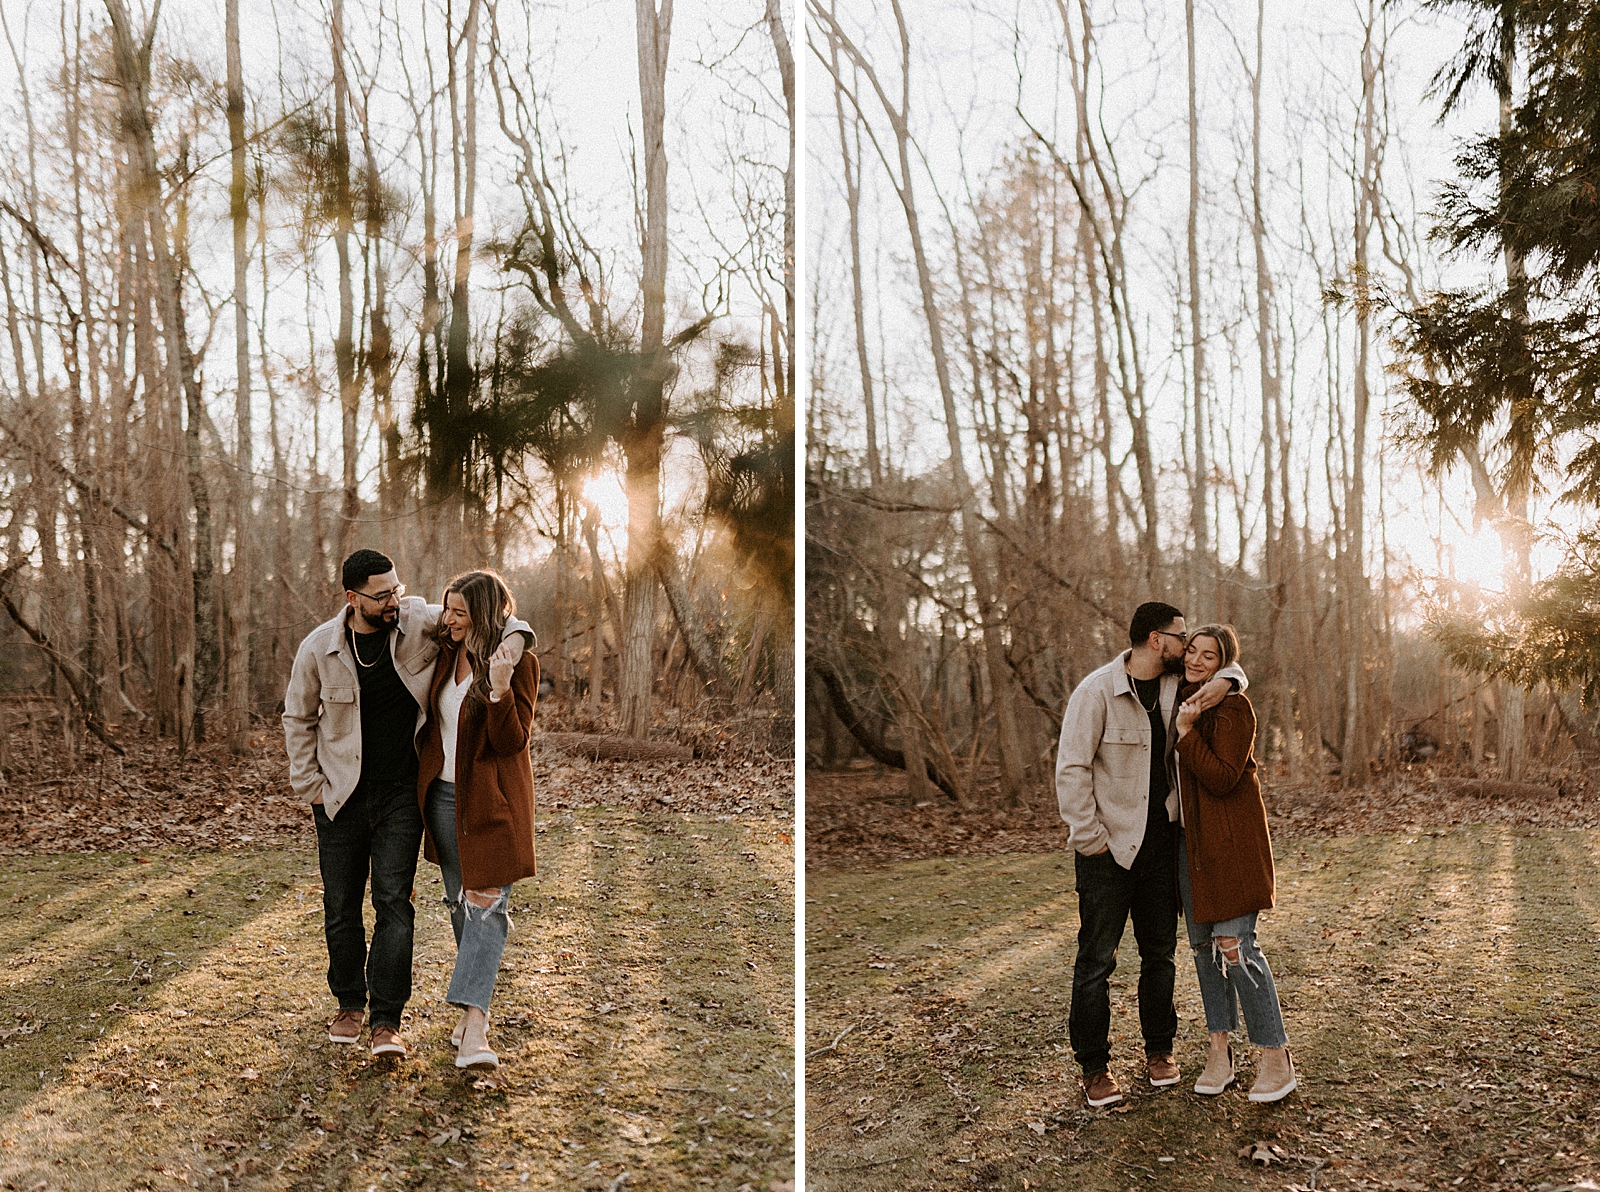 Couple with arms around each other out in the forest